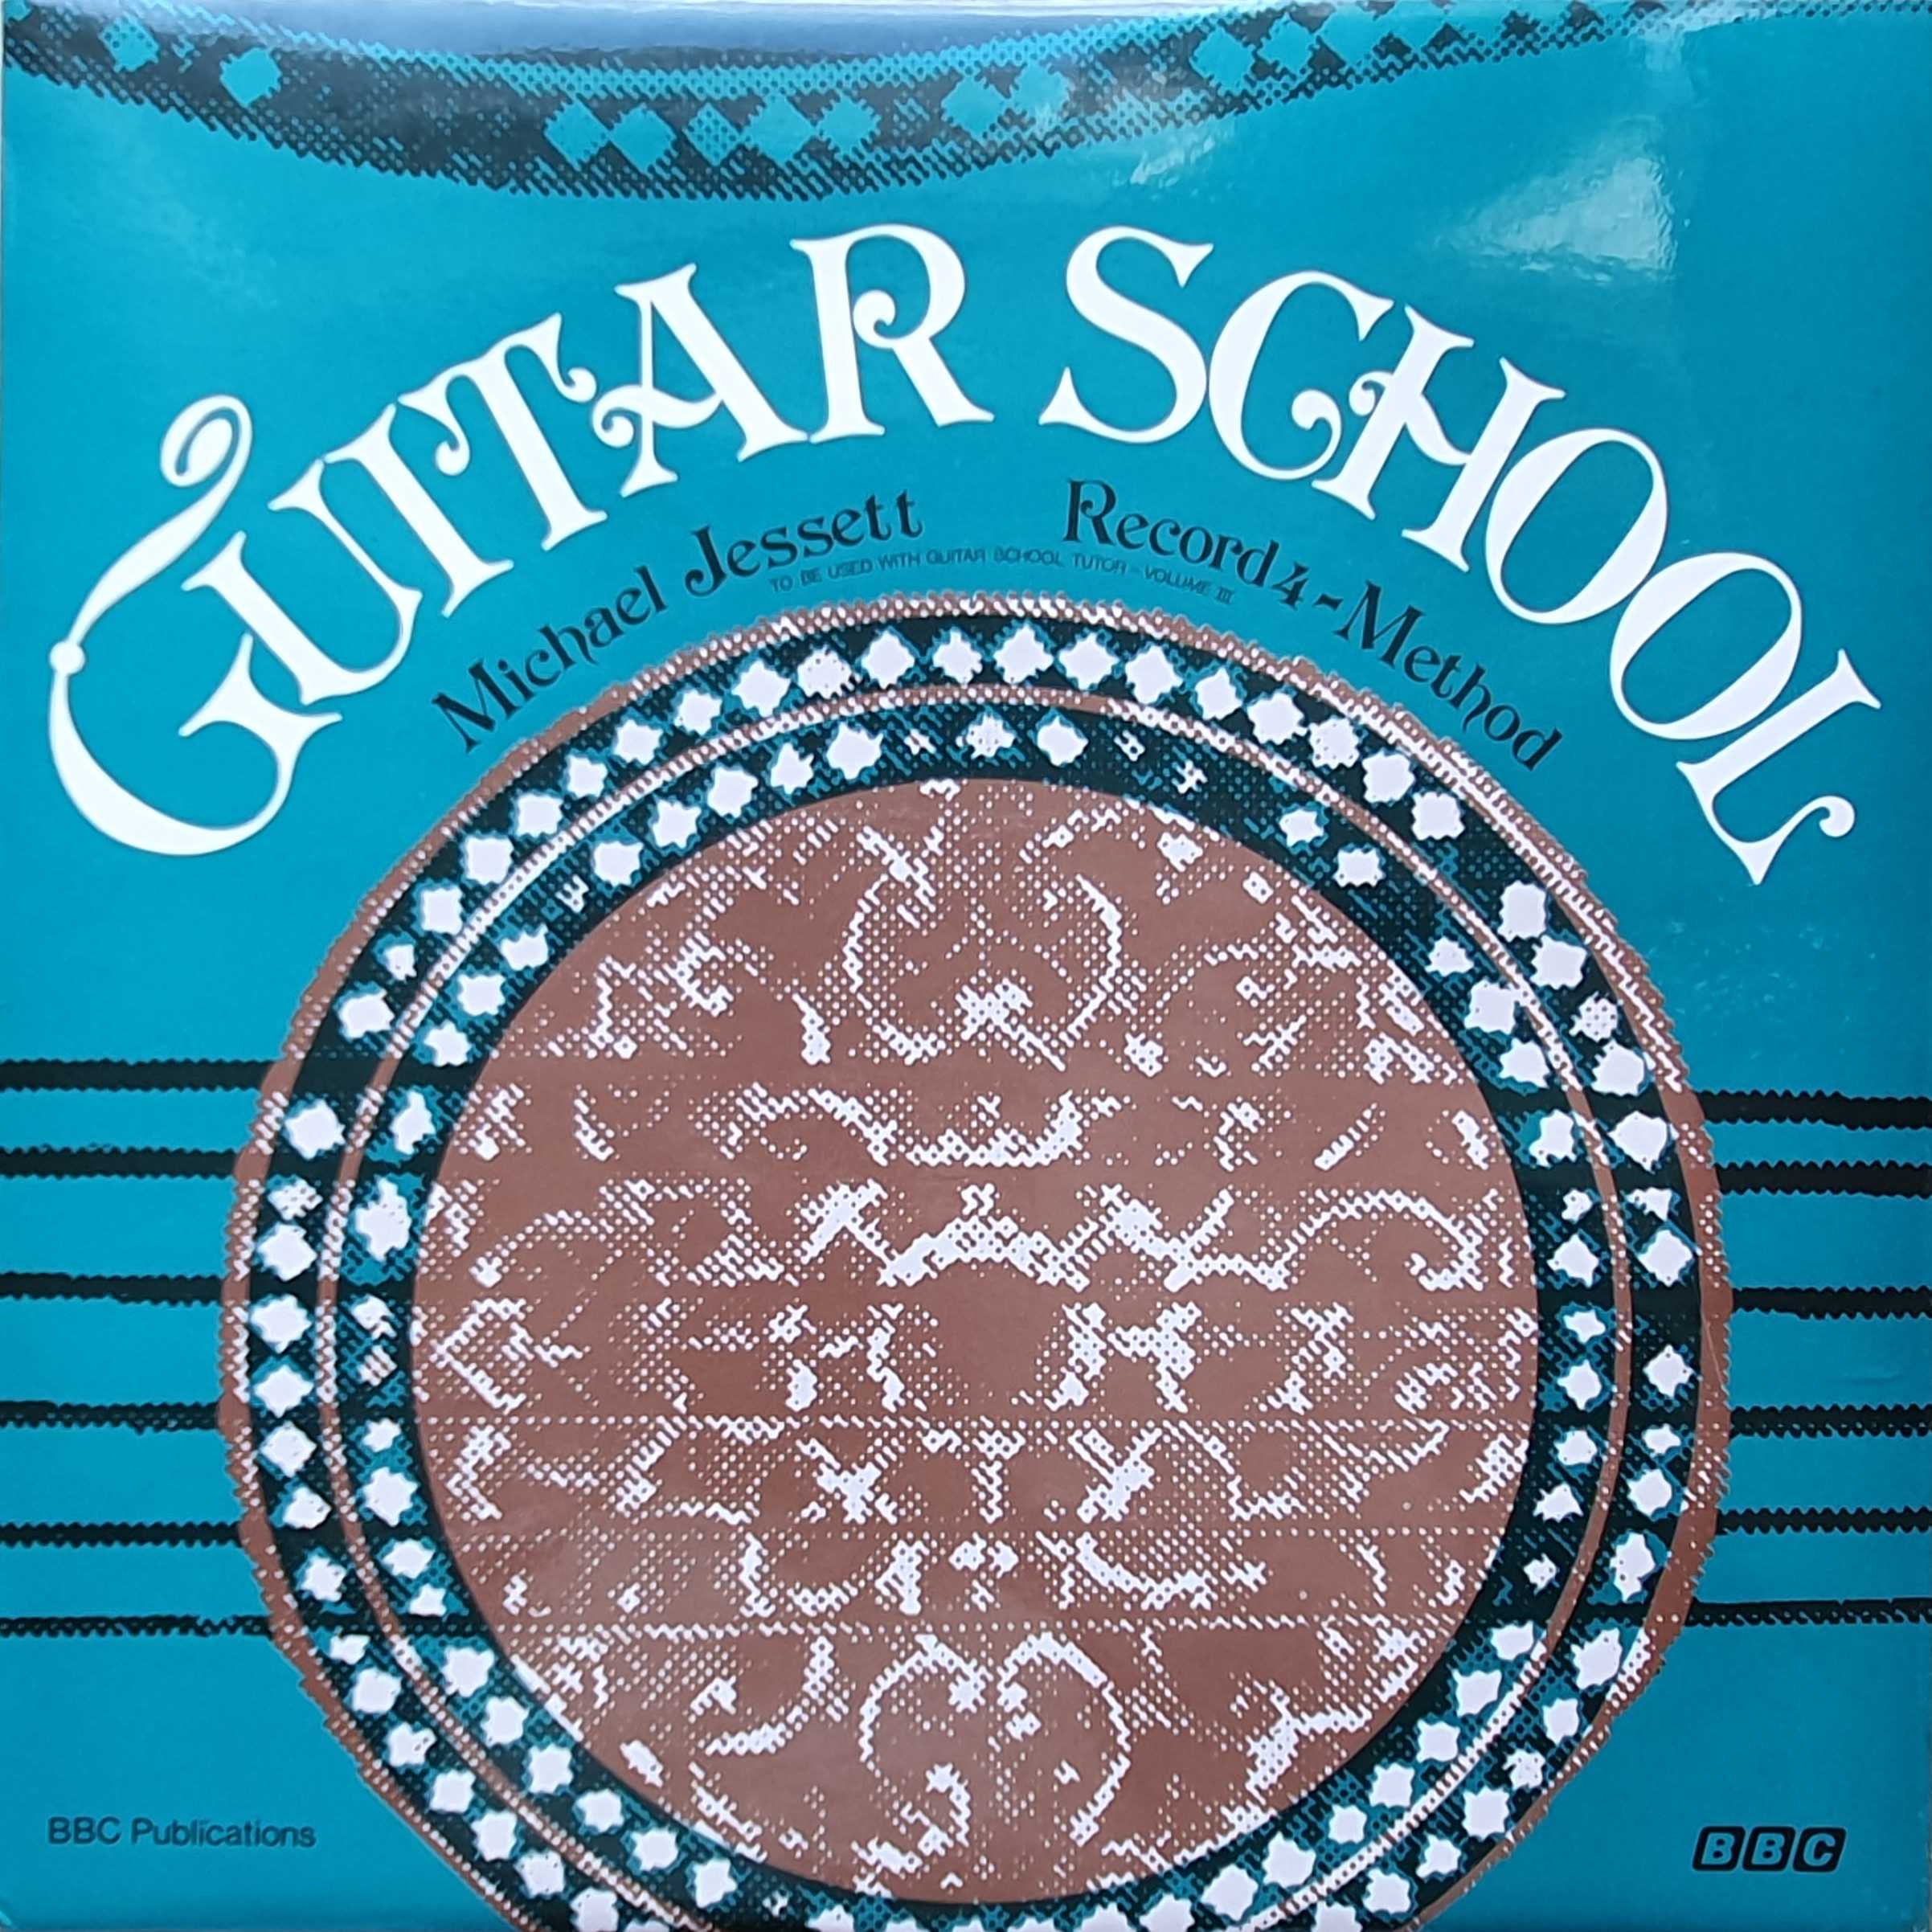 Picture of OP 207/208 Guitar school - Record 4 - Method by artist Michael Jessett from the BBC albums - Records and Tapes library